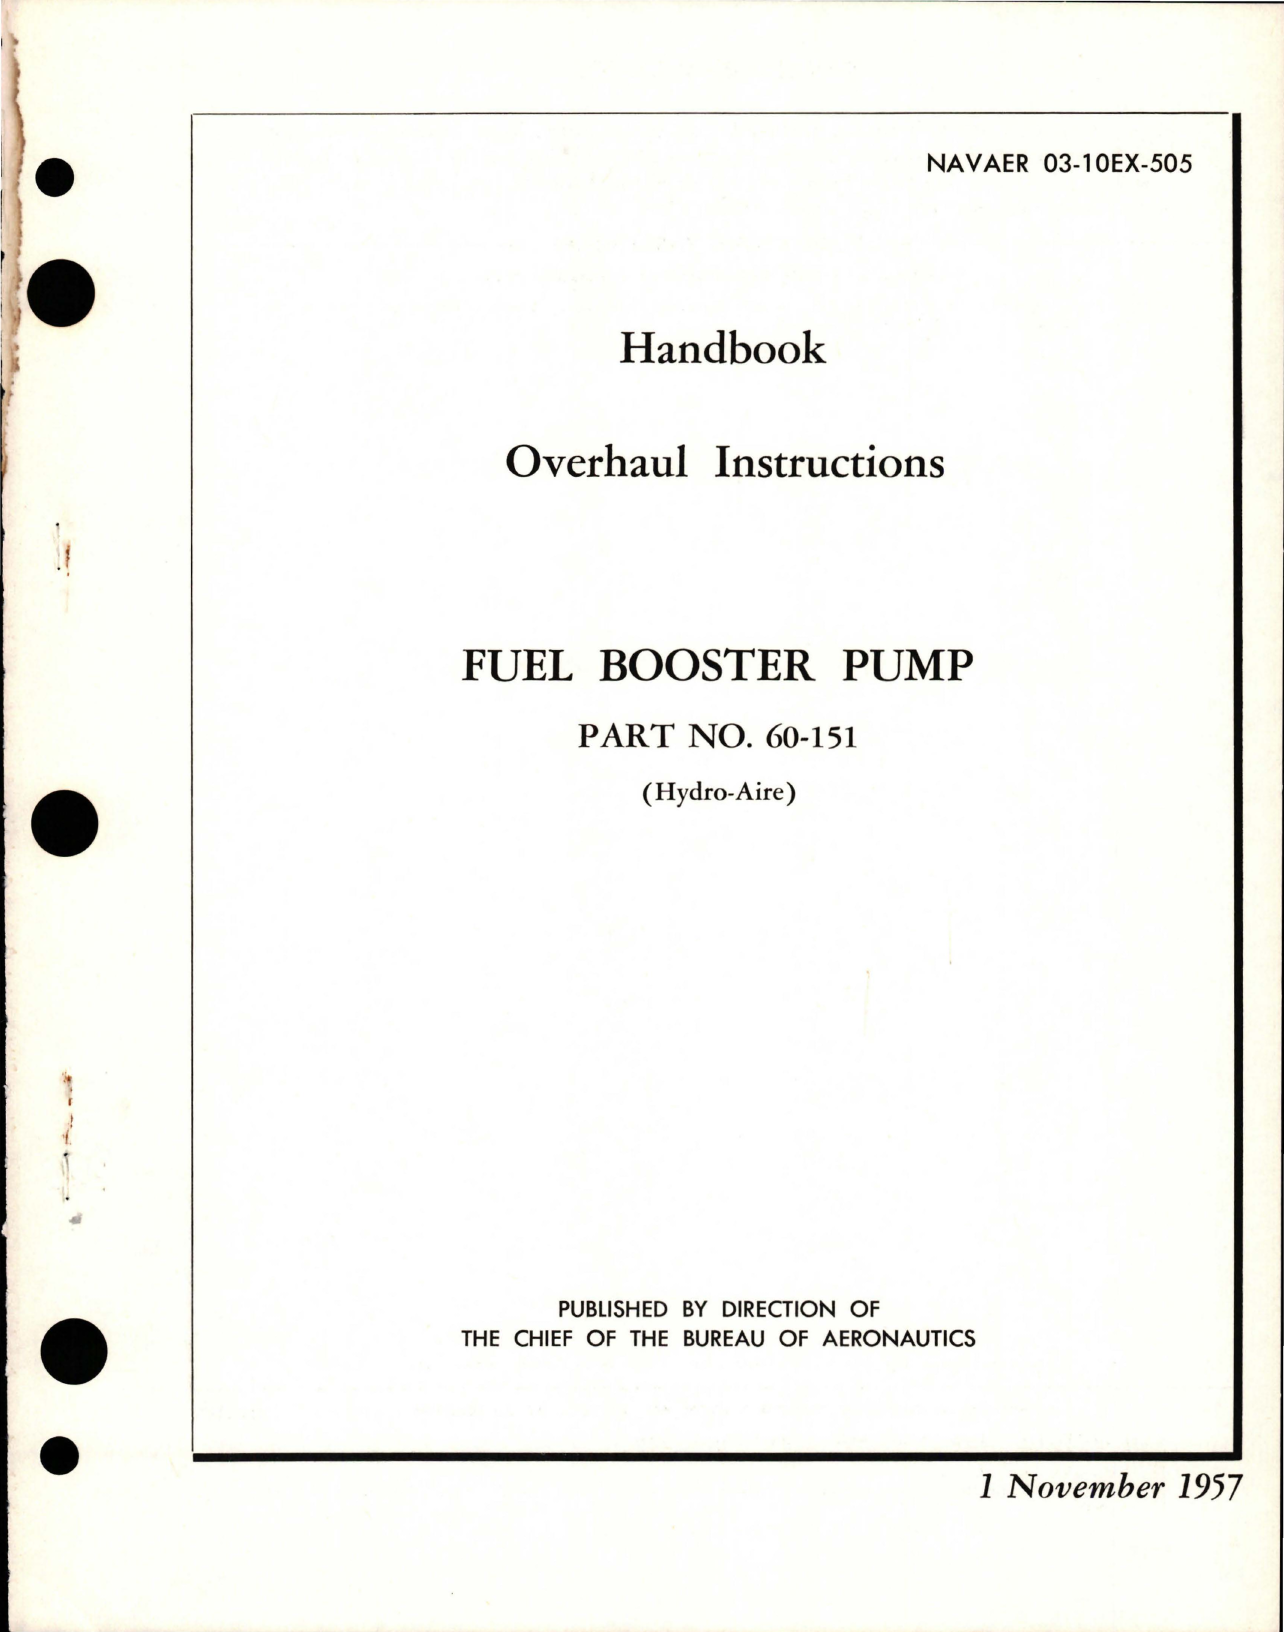 Sample page 1 from AirCorps Library document: Overhaul Instructions for Fuel Booster Pump - Part 60-151